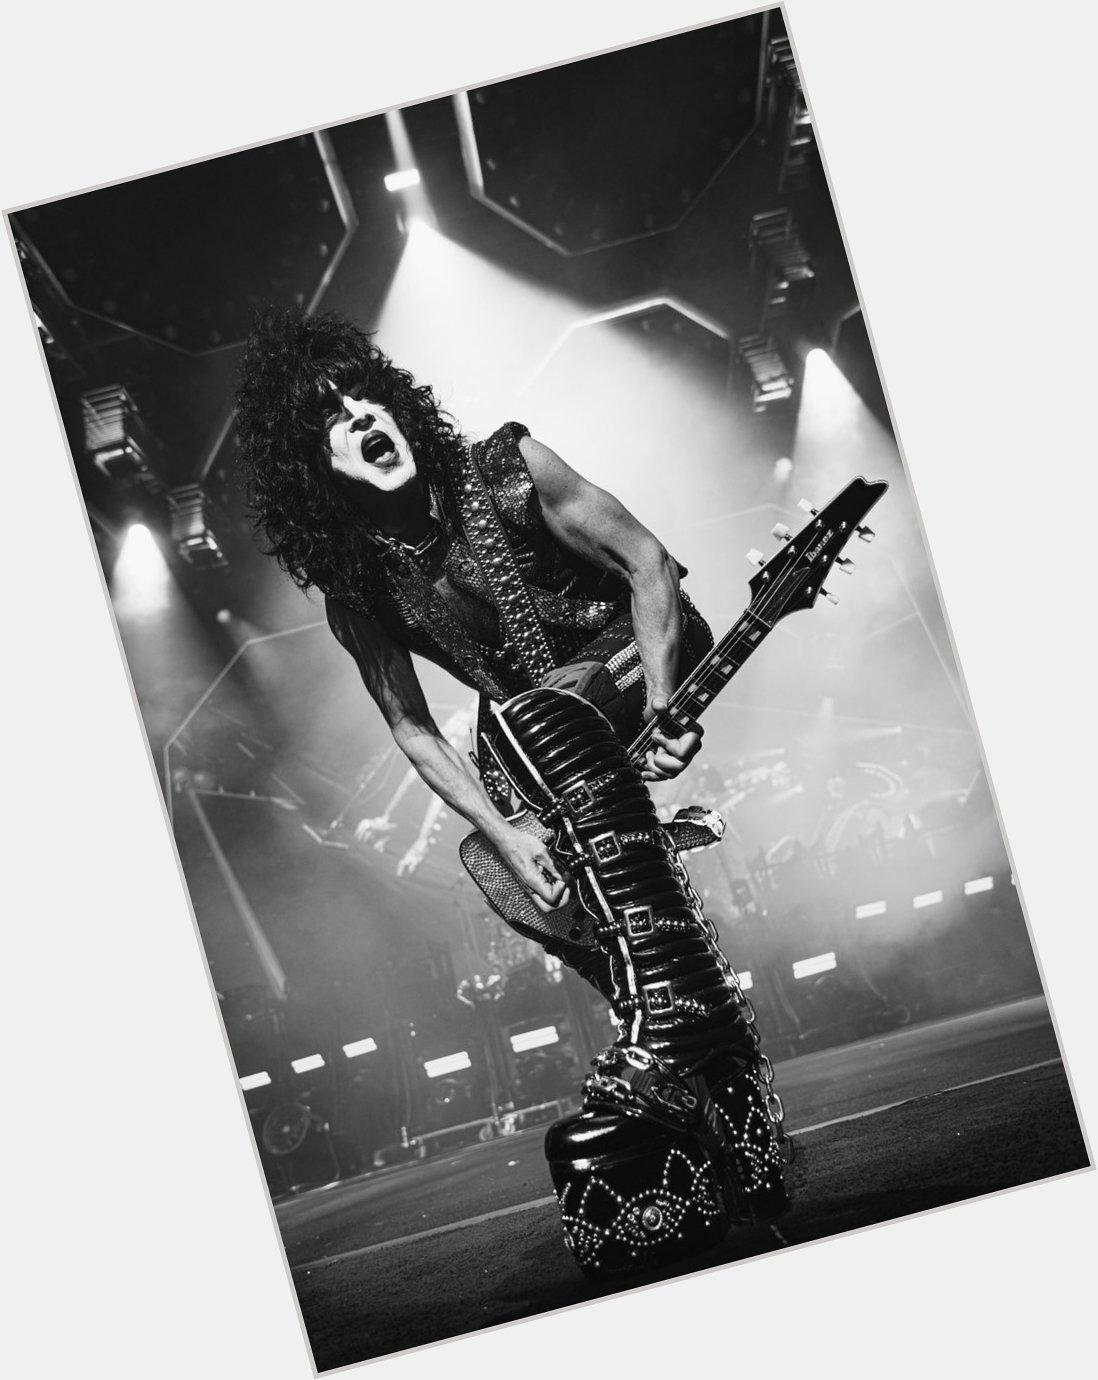 Happy birthday to paul stanley, thanks for helping me capture one of my favorite shots ever 